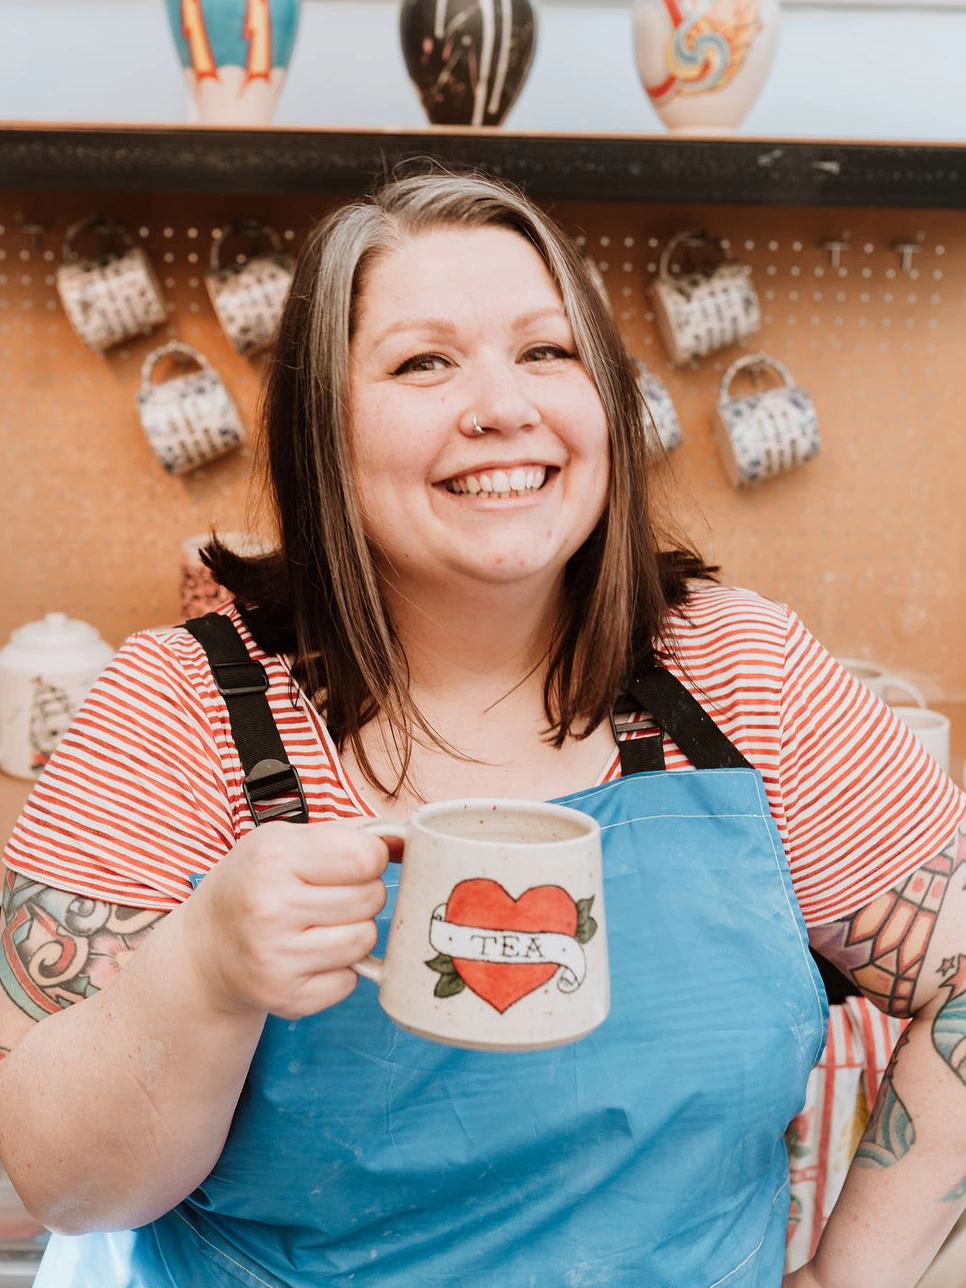 Emma Puddick, a white woman in her forties looks directly at camera smiling.  She is wearing a blue apron, and red and white striped shirt.  she is holding a handmade ceramic mug, with a heart and banner tattoo reading TEA